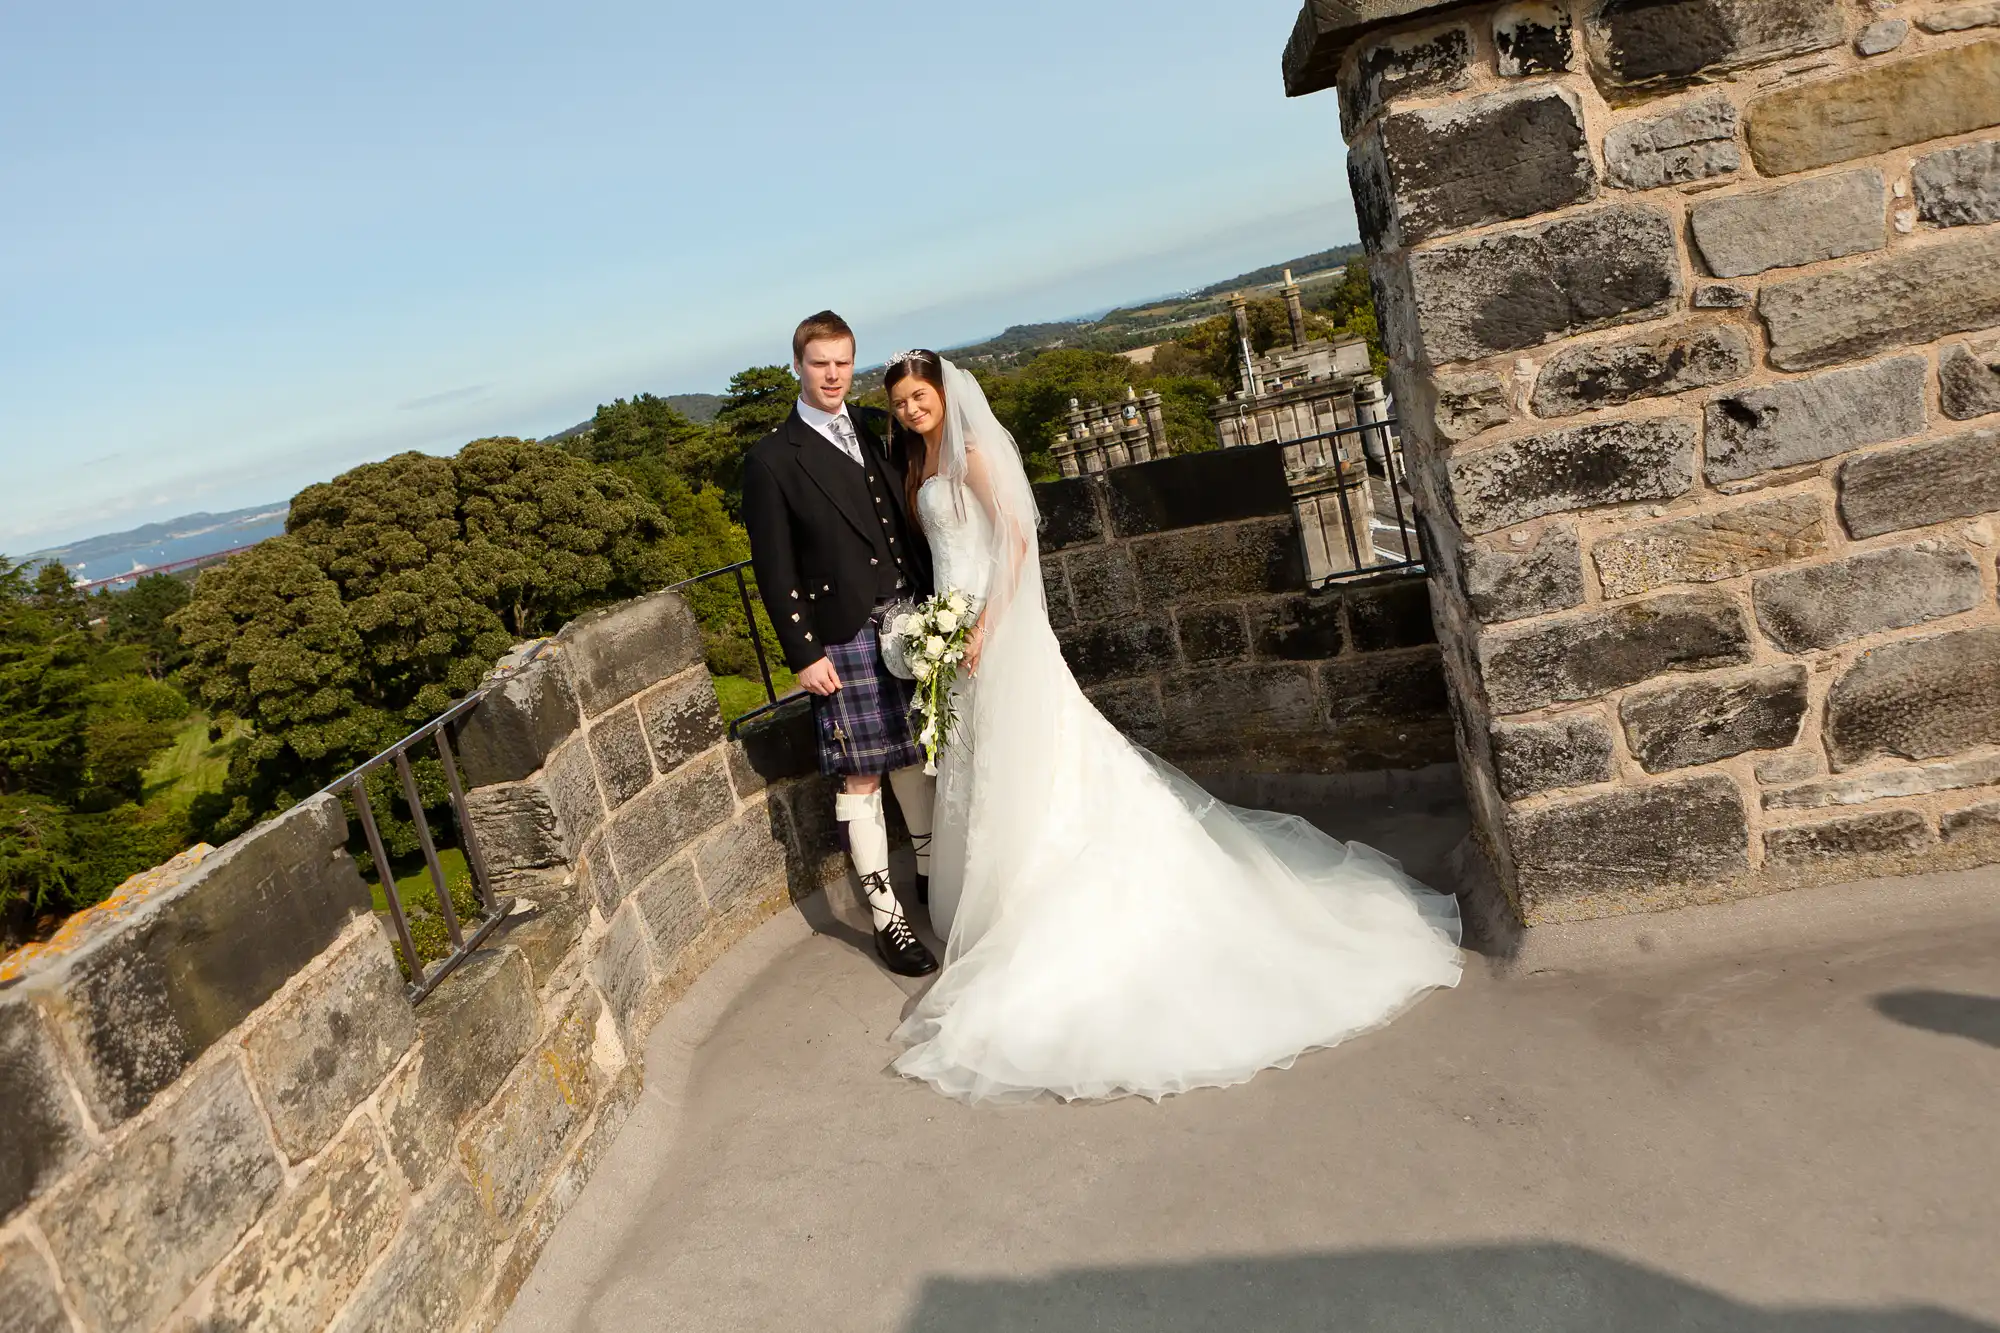 A newlywed couple in wedding attire, the groom in a kilt, stands on a stone castle walkway, with scenic trees and water in the background.